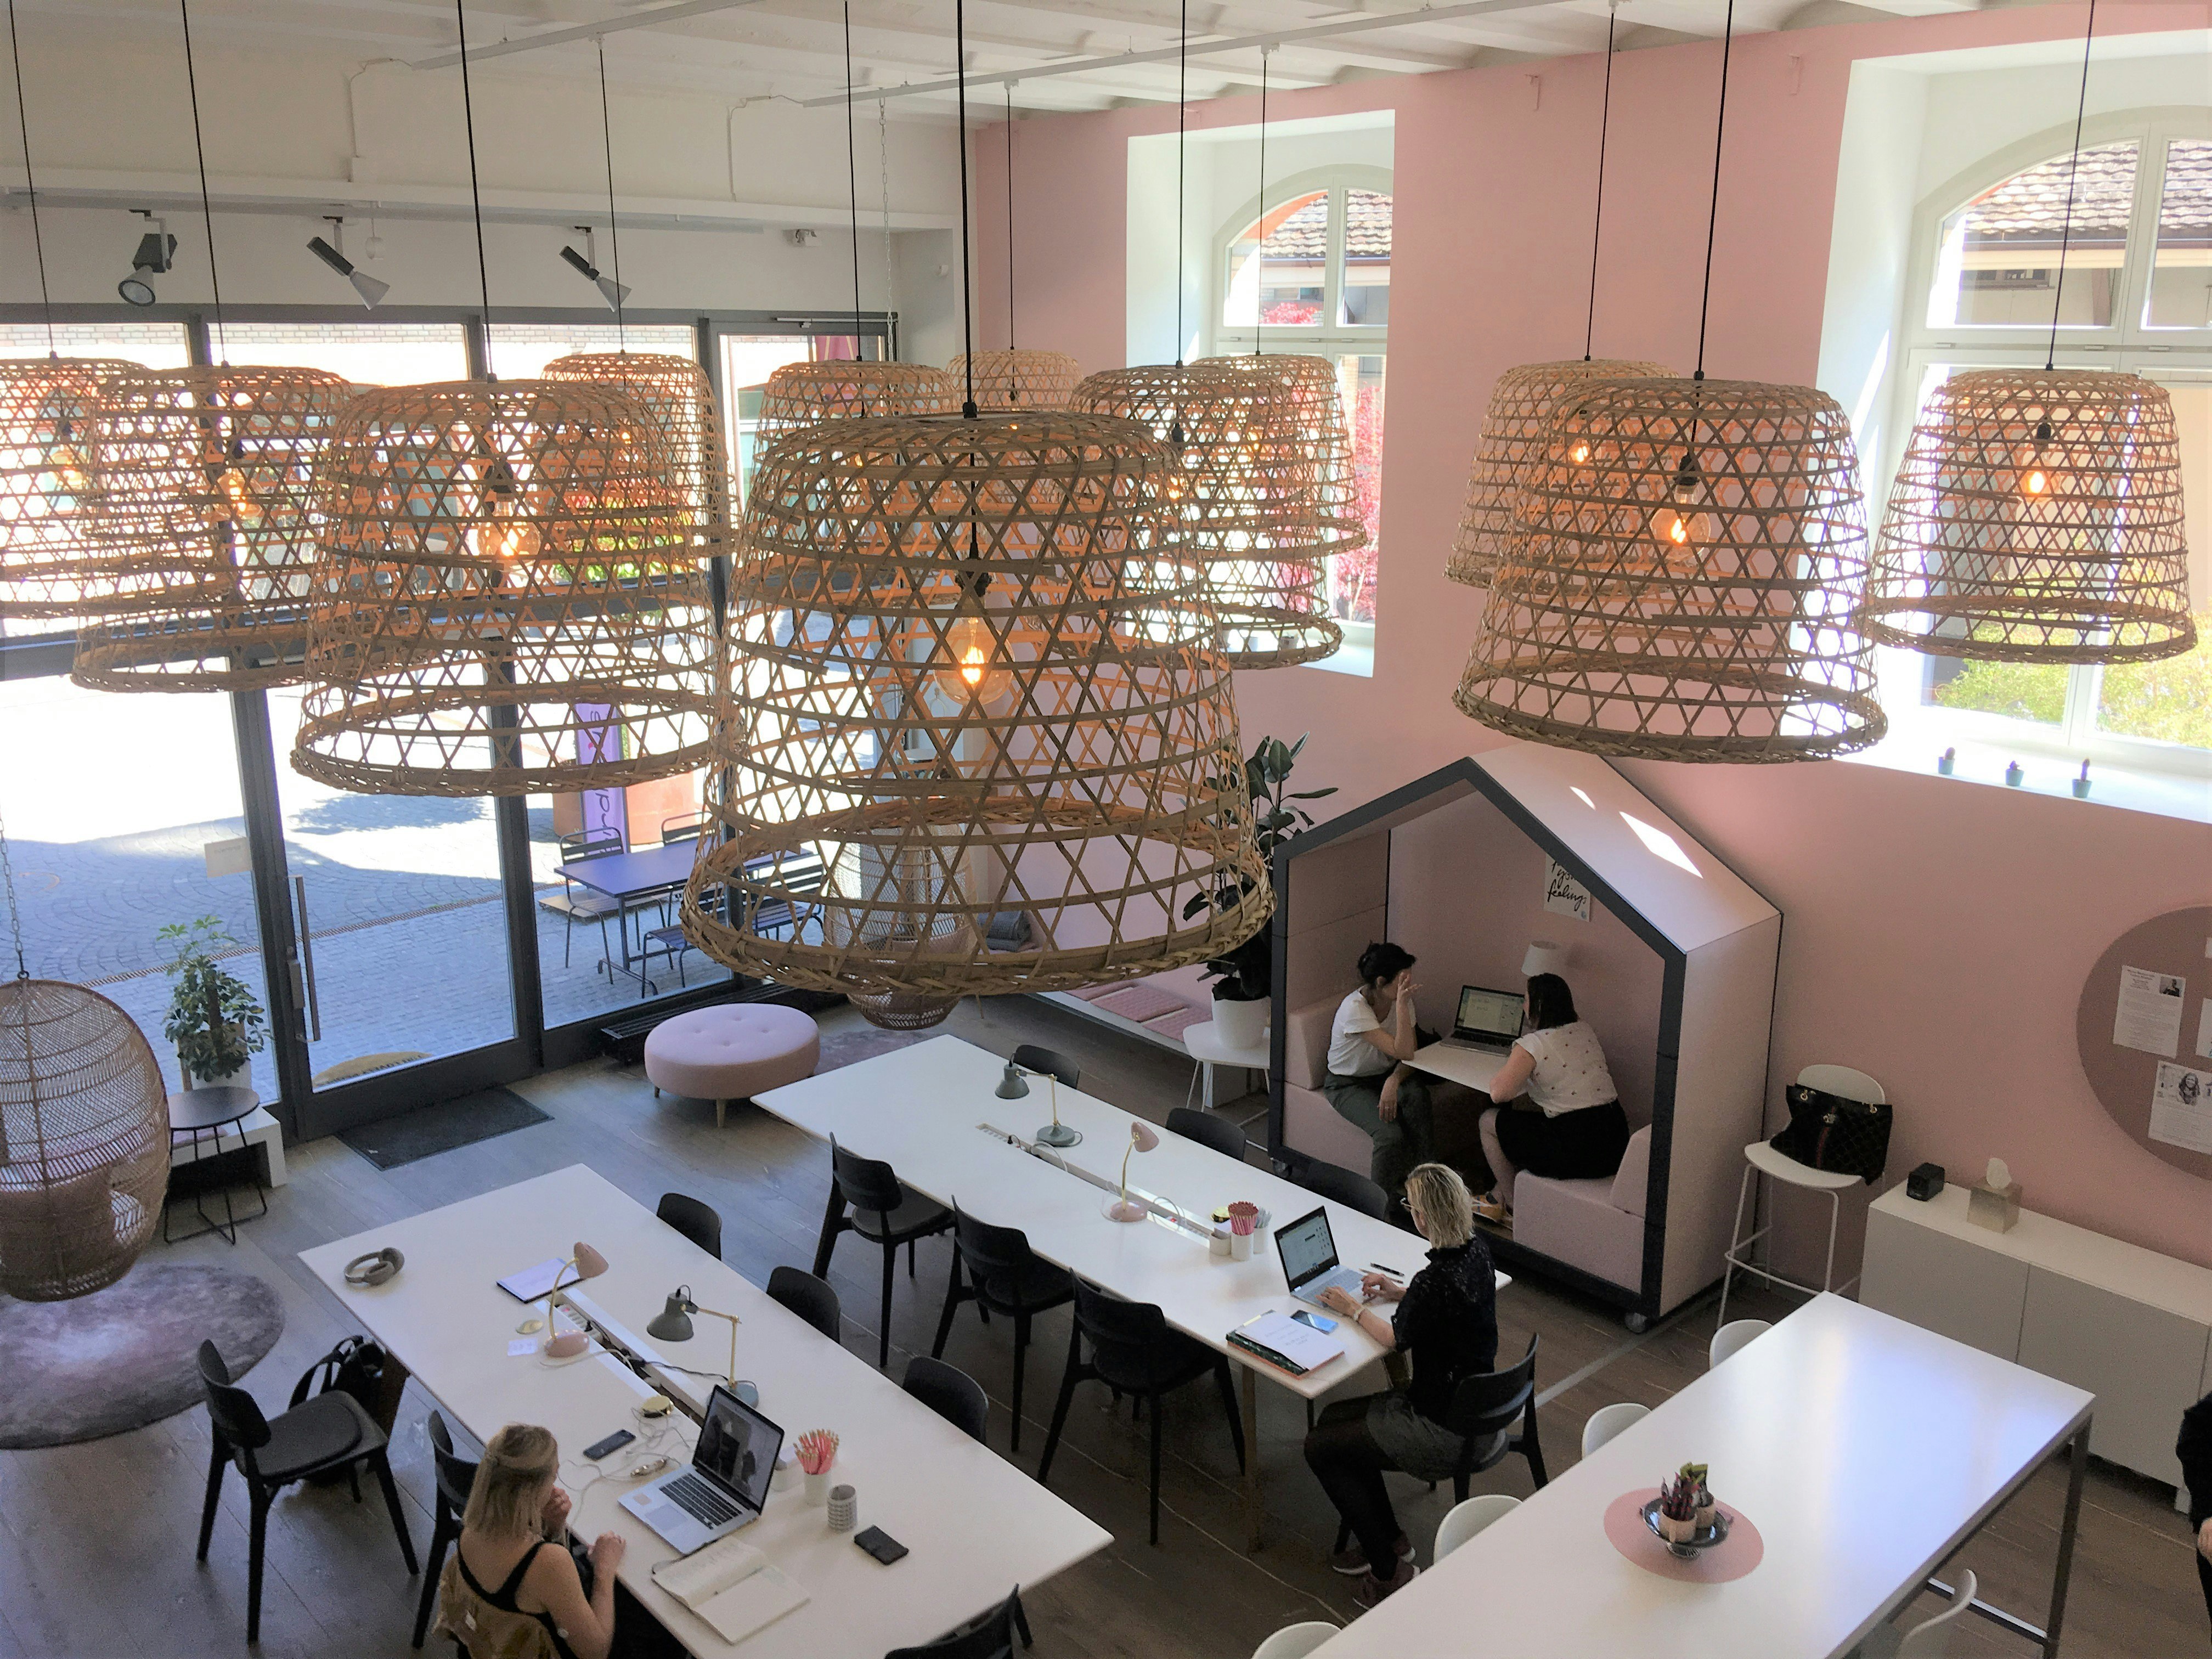 Looking down from a mezzanine floor to the high-ceilinged interior of Birdhaus: women are working at white tables, there is a pink wall with two high windows, and many oversized wicker lampshades overhead.